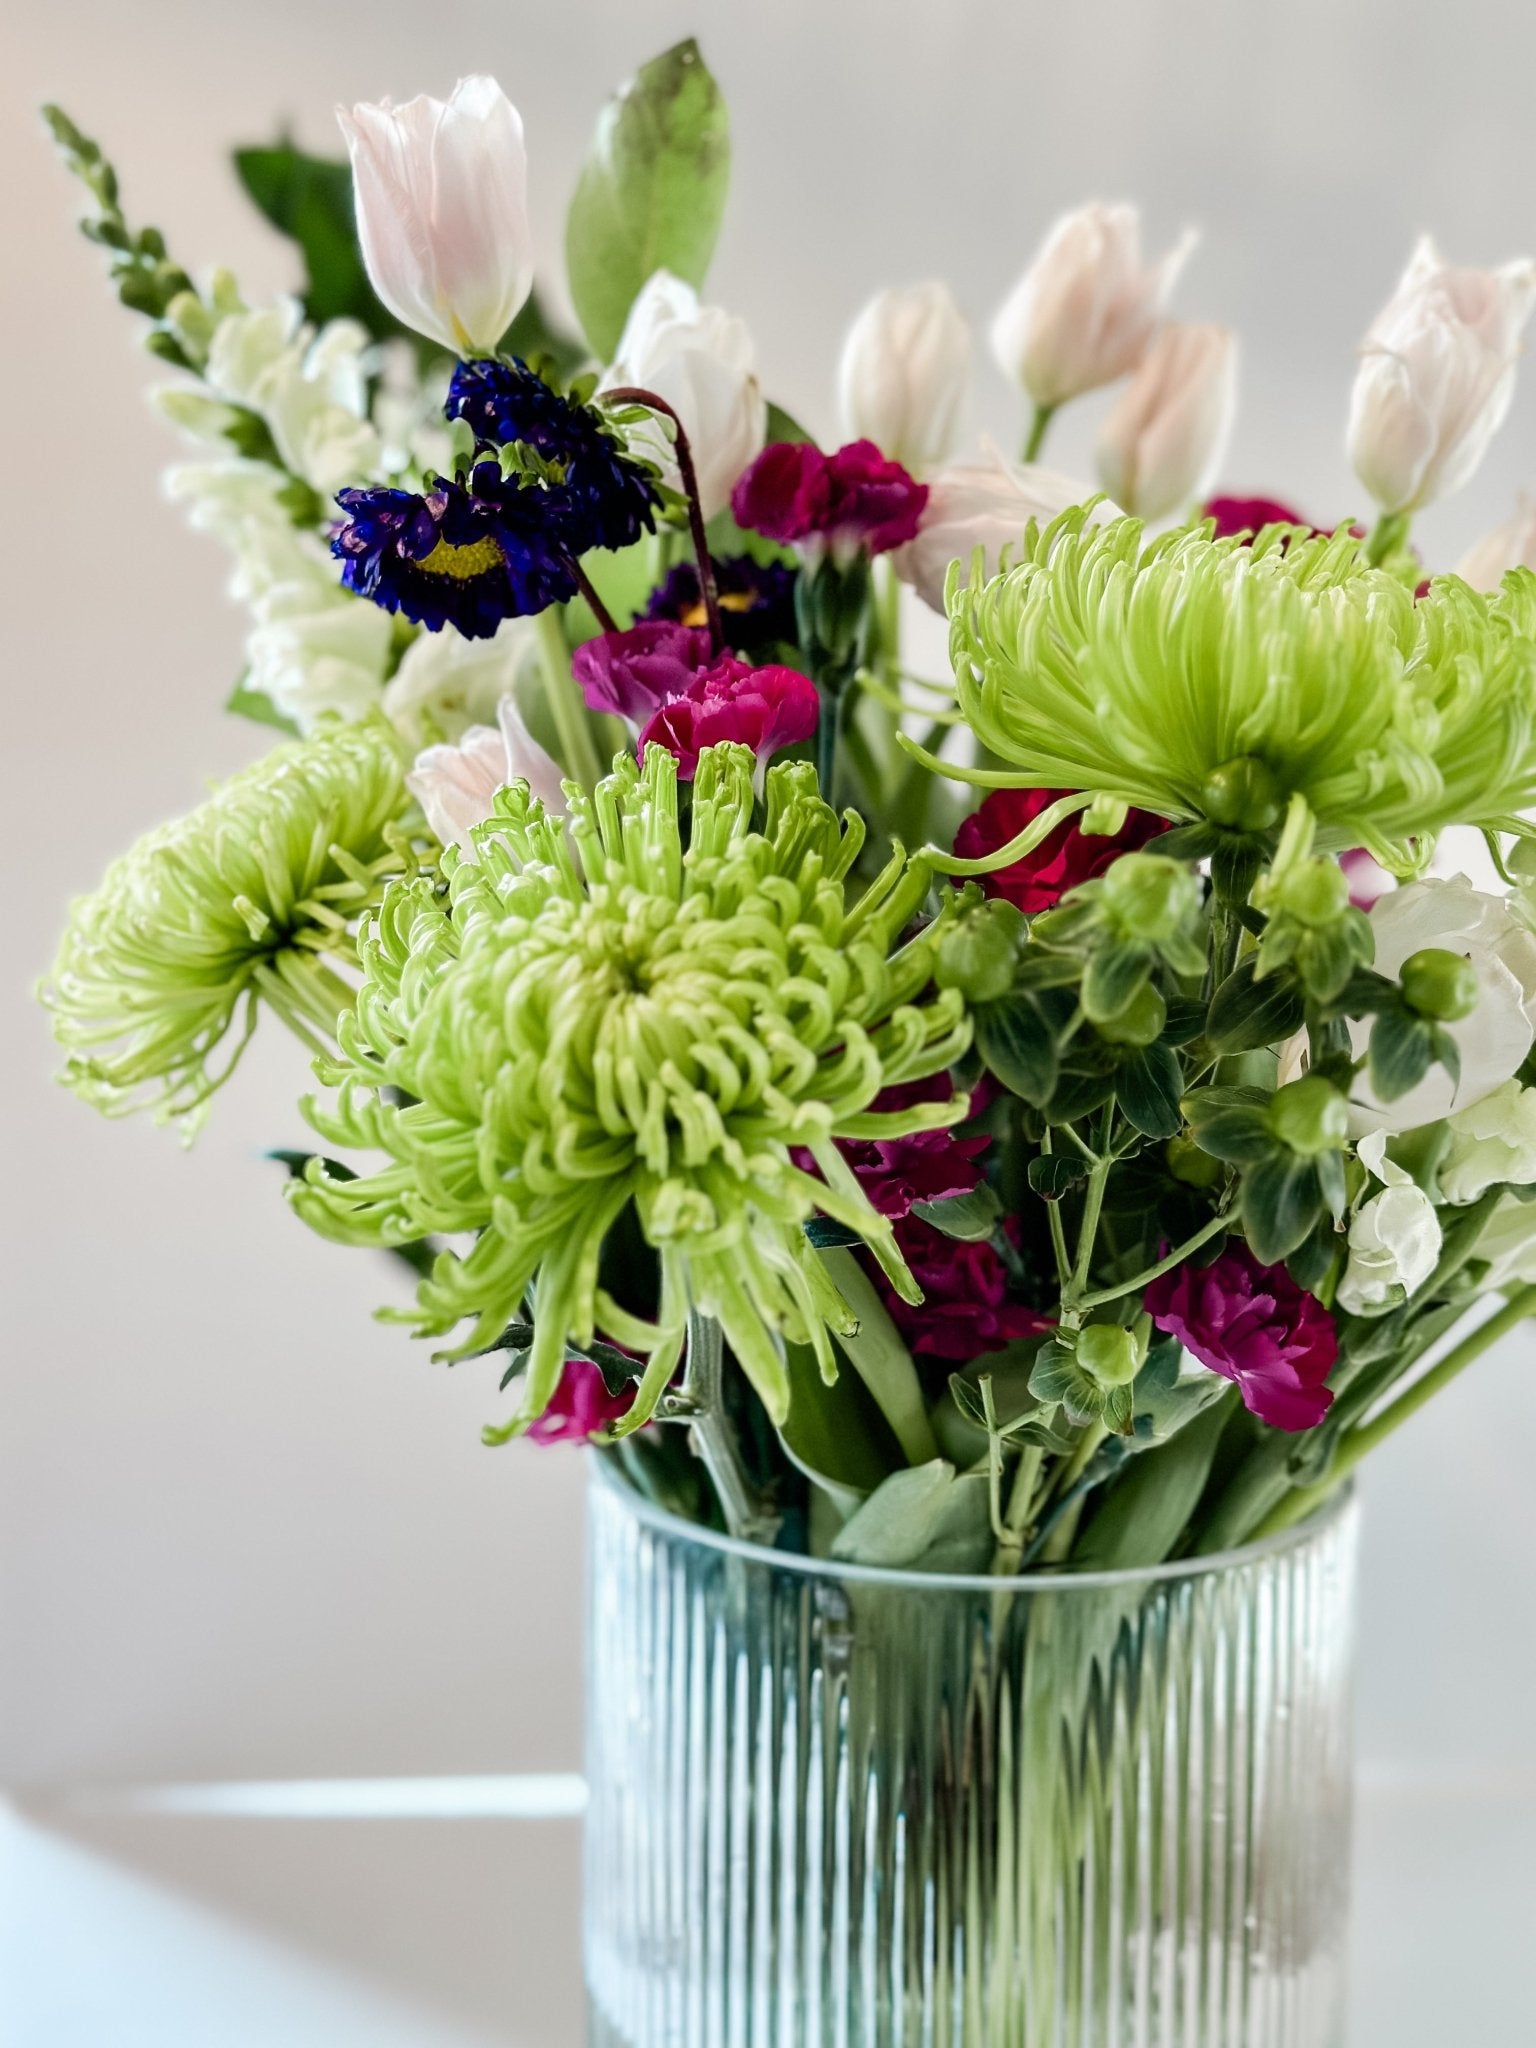 DIY Floral Mastery: Crafting Budget-Friendly, Flower Shop-Quality Bouquets at Home